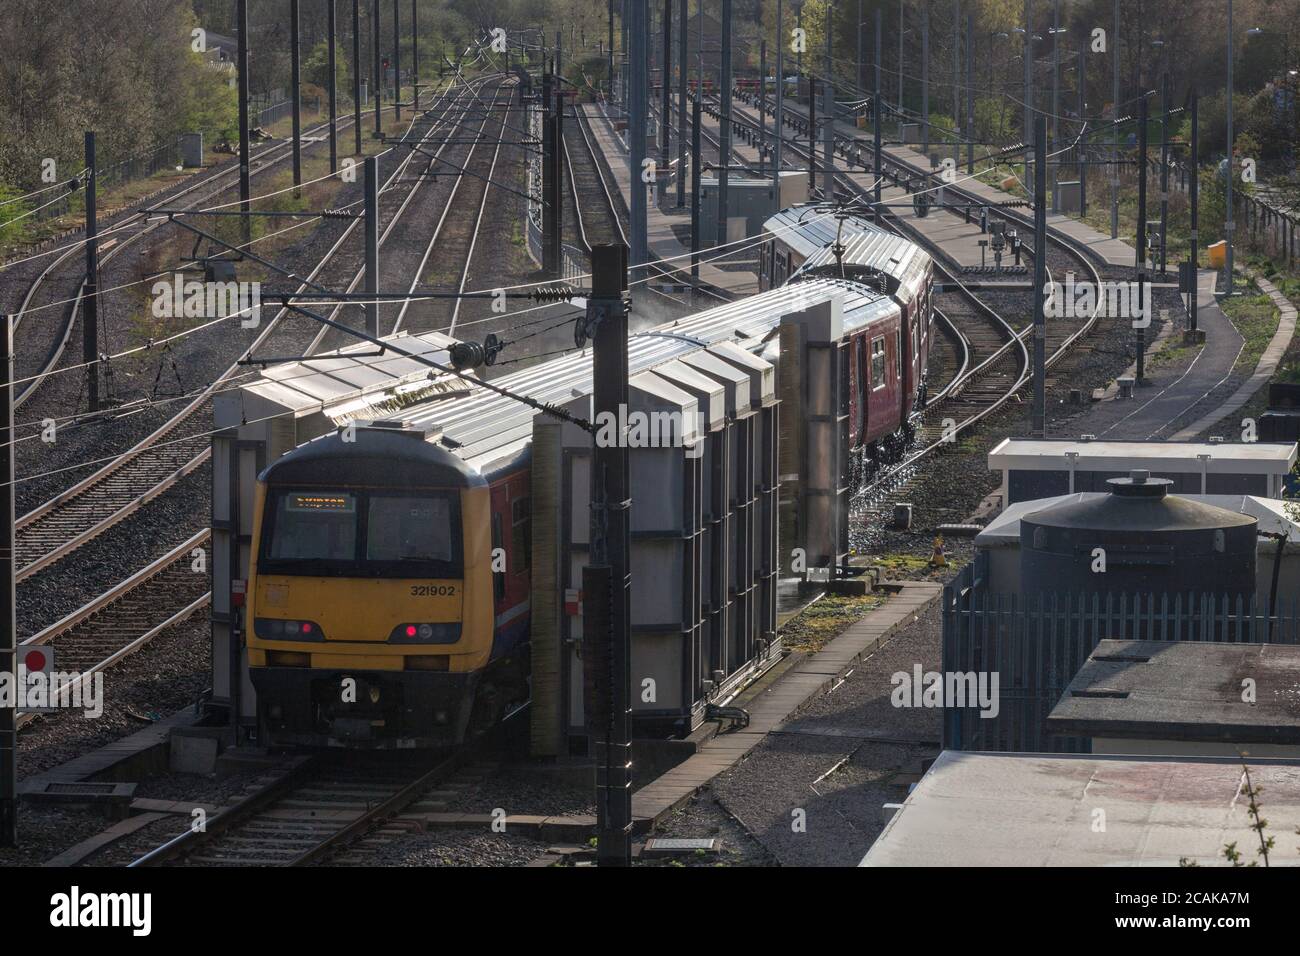 Northern rail class 321 electric train 321902 passing through the carriage washing plant at  Skipton Broughton Road carriage sidings / depot Stock Photo